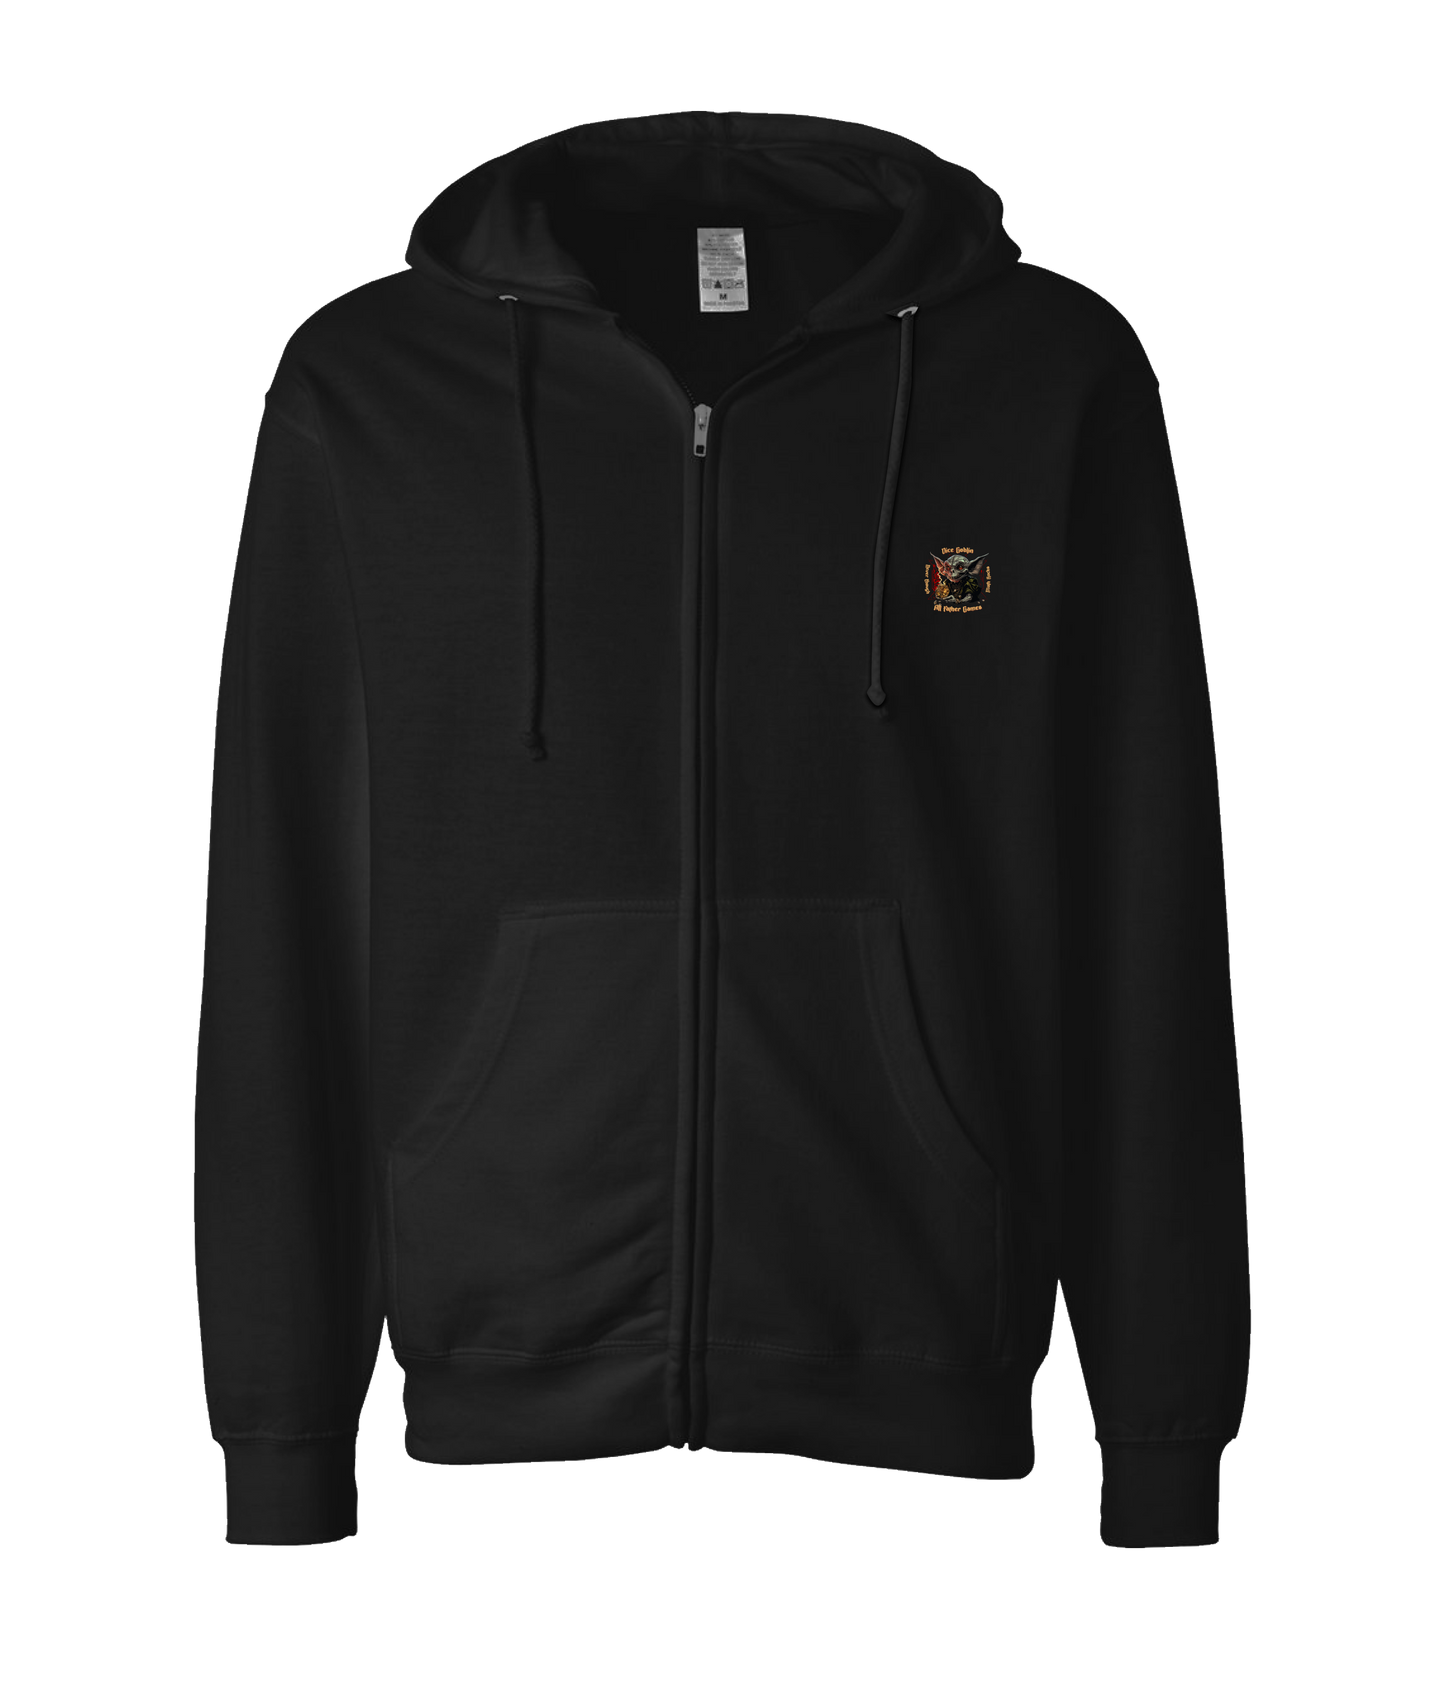 All Father Games - DICE GOBLIN - Black Zip Up Hoodie